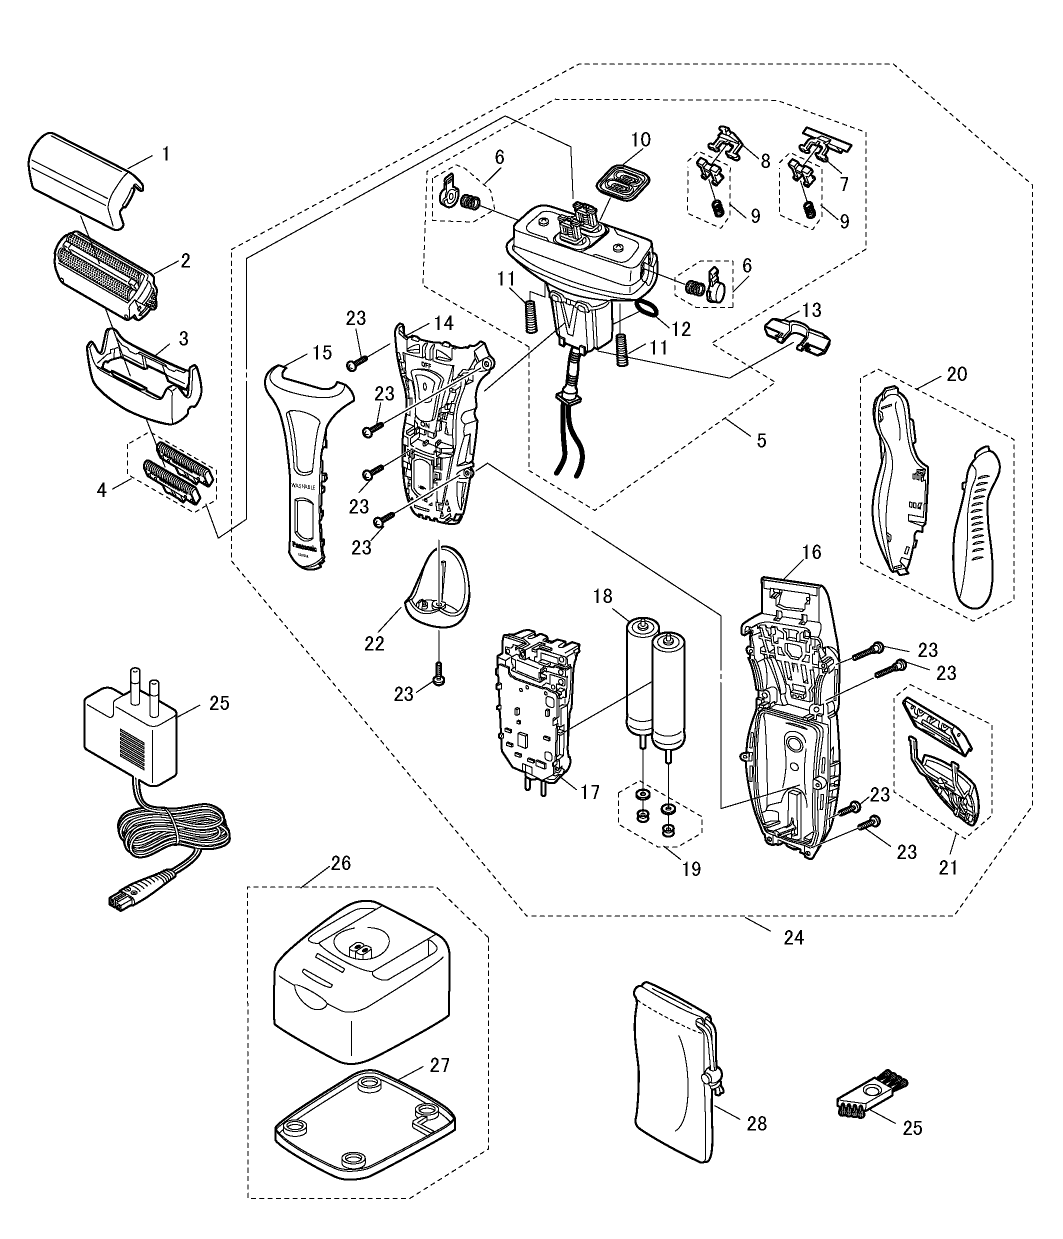 ES-RT60: Exploded View